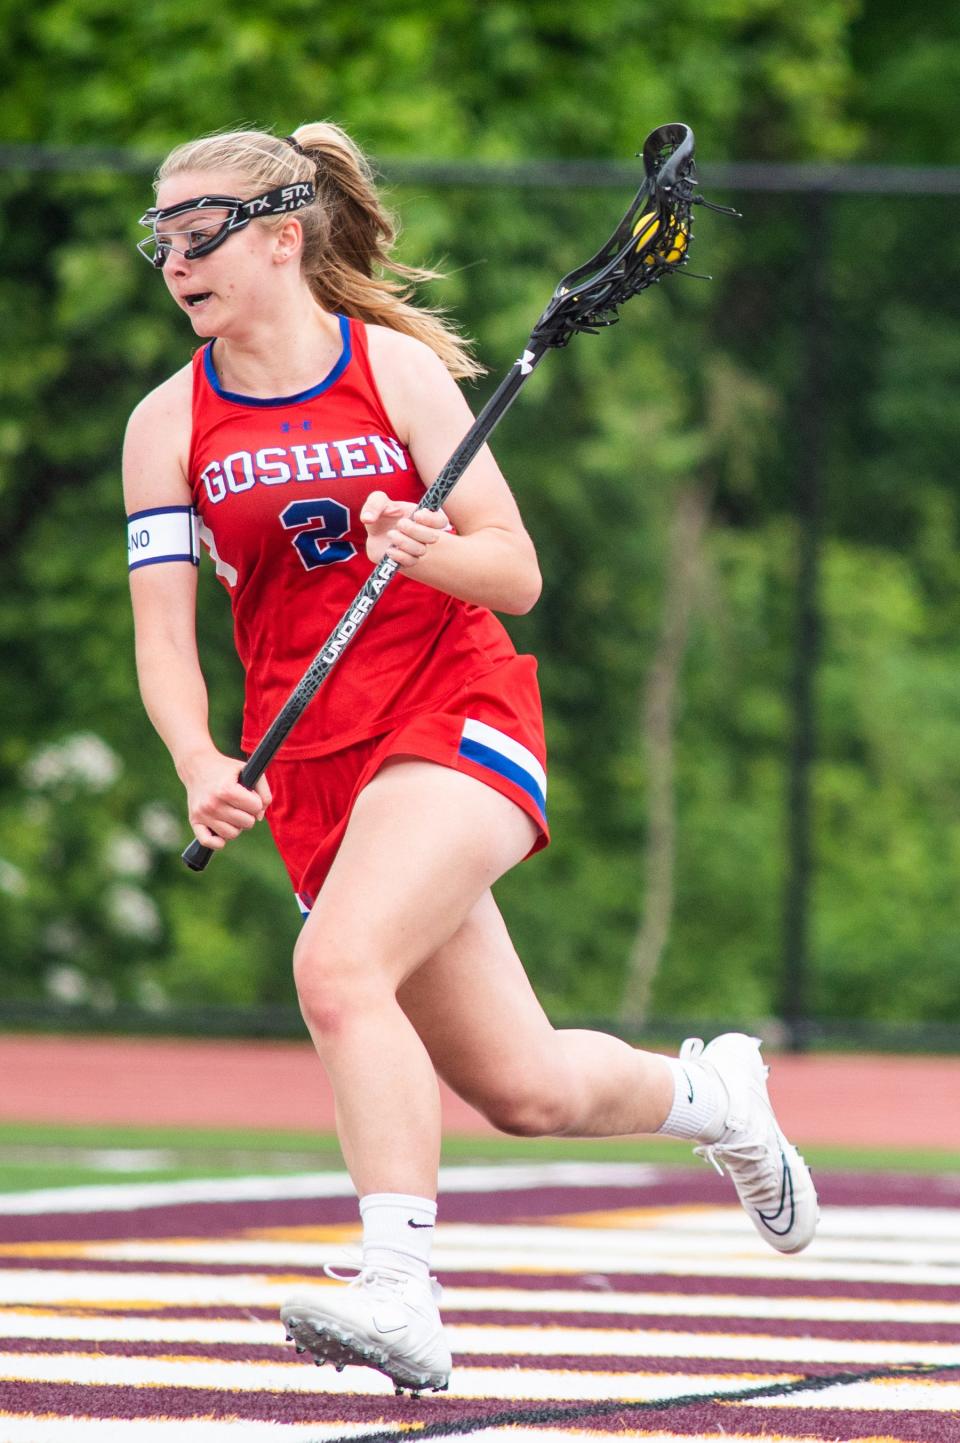 Goshen's Grace Gardner runs down field during the Section 9 class C girls lacrosse championship game at O'Neill High School in Goshen, NY on Thursday, May 26, 2022. Saugerties defeated Goshen 11-8. KELLY MARSH/FOR THE TIMES HERALD-RECORD